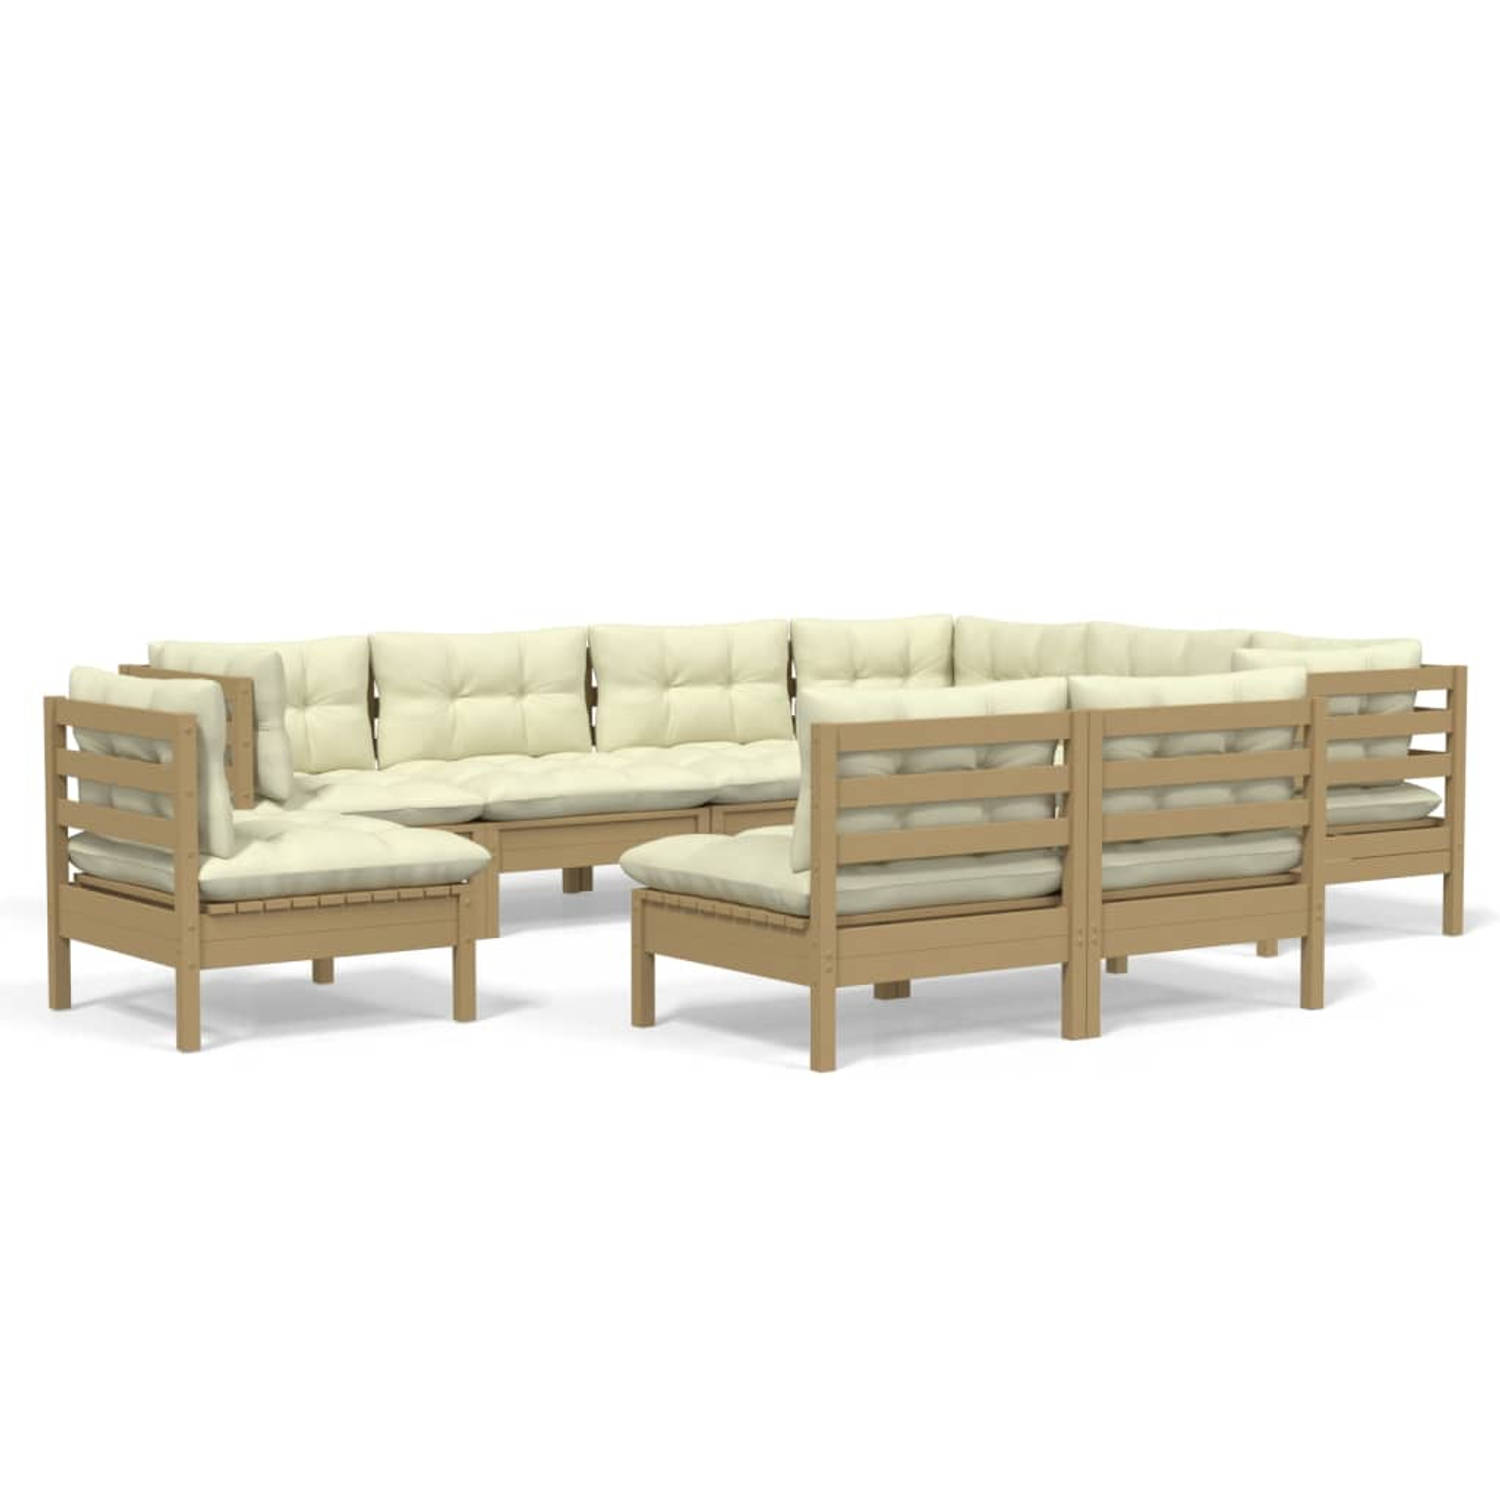 The Living Store Loungeset - Grenenhout - Honingbruin - 63.5 x 63.5 cm - Inclusief kussens